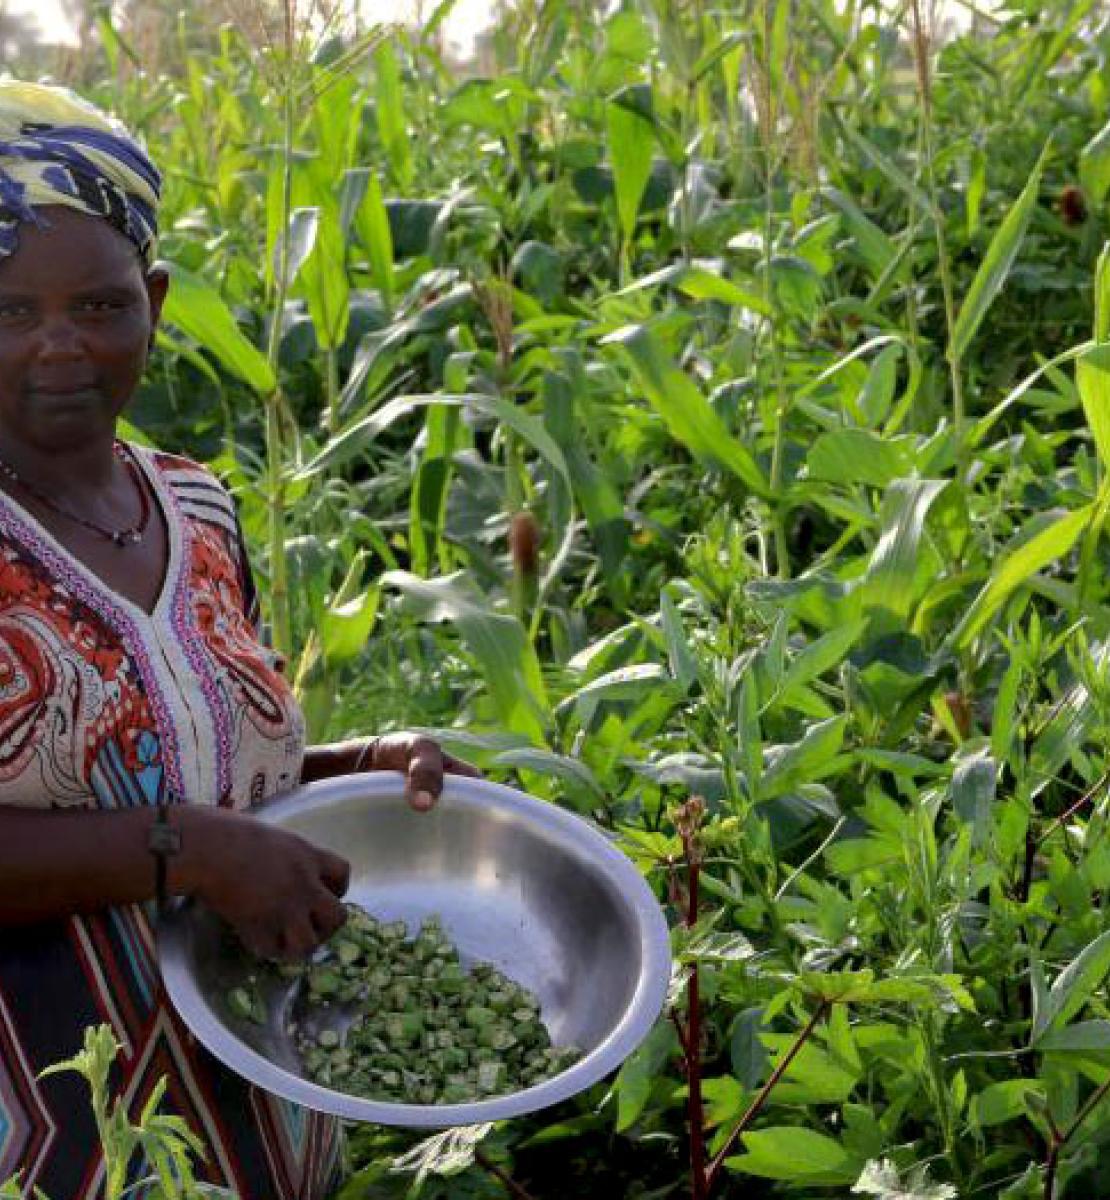 A woman holds a bowl of beans as she stands in the middle of a lush field of crops.